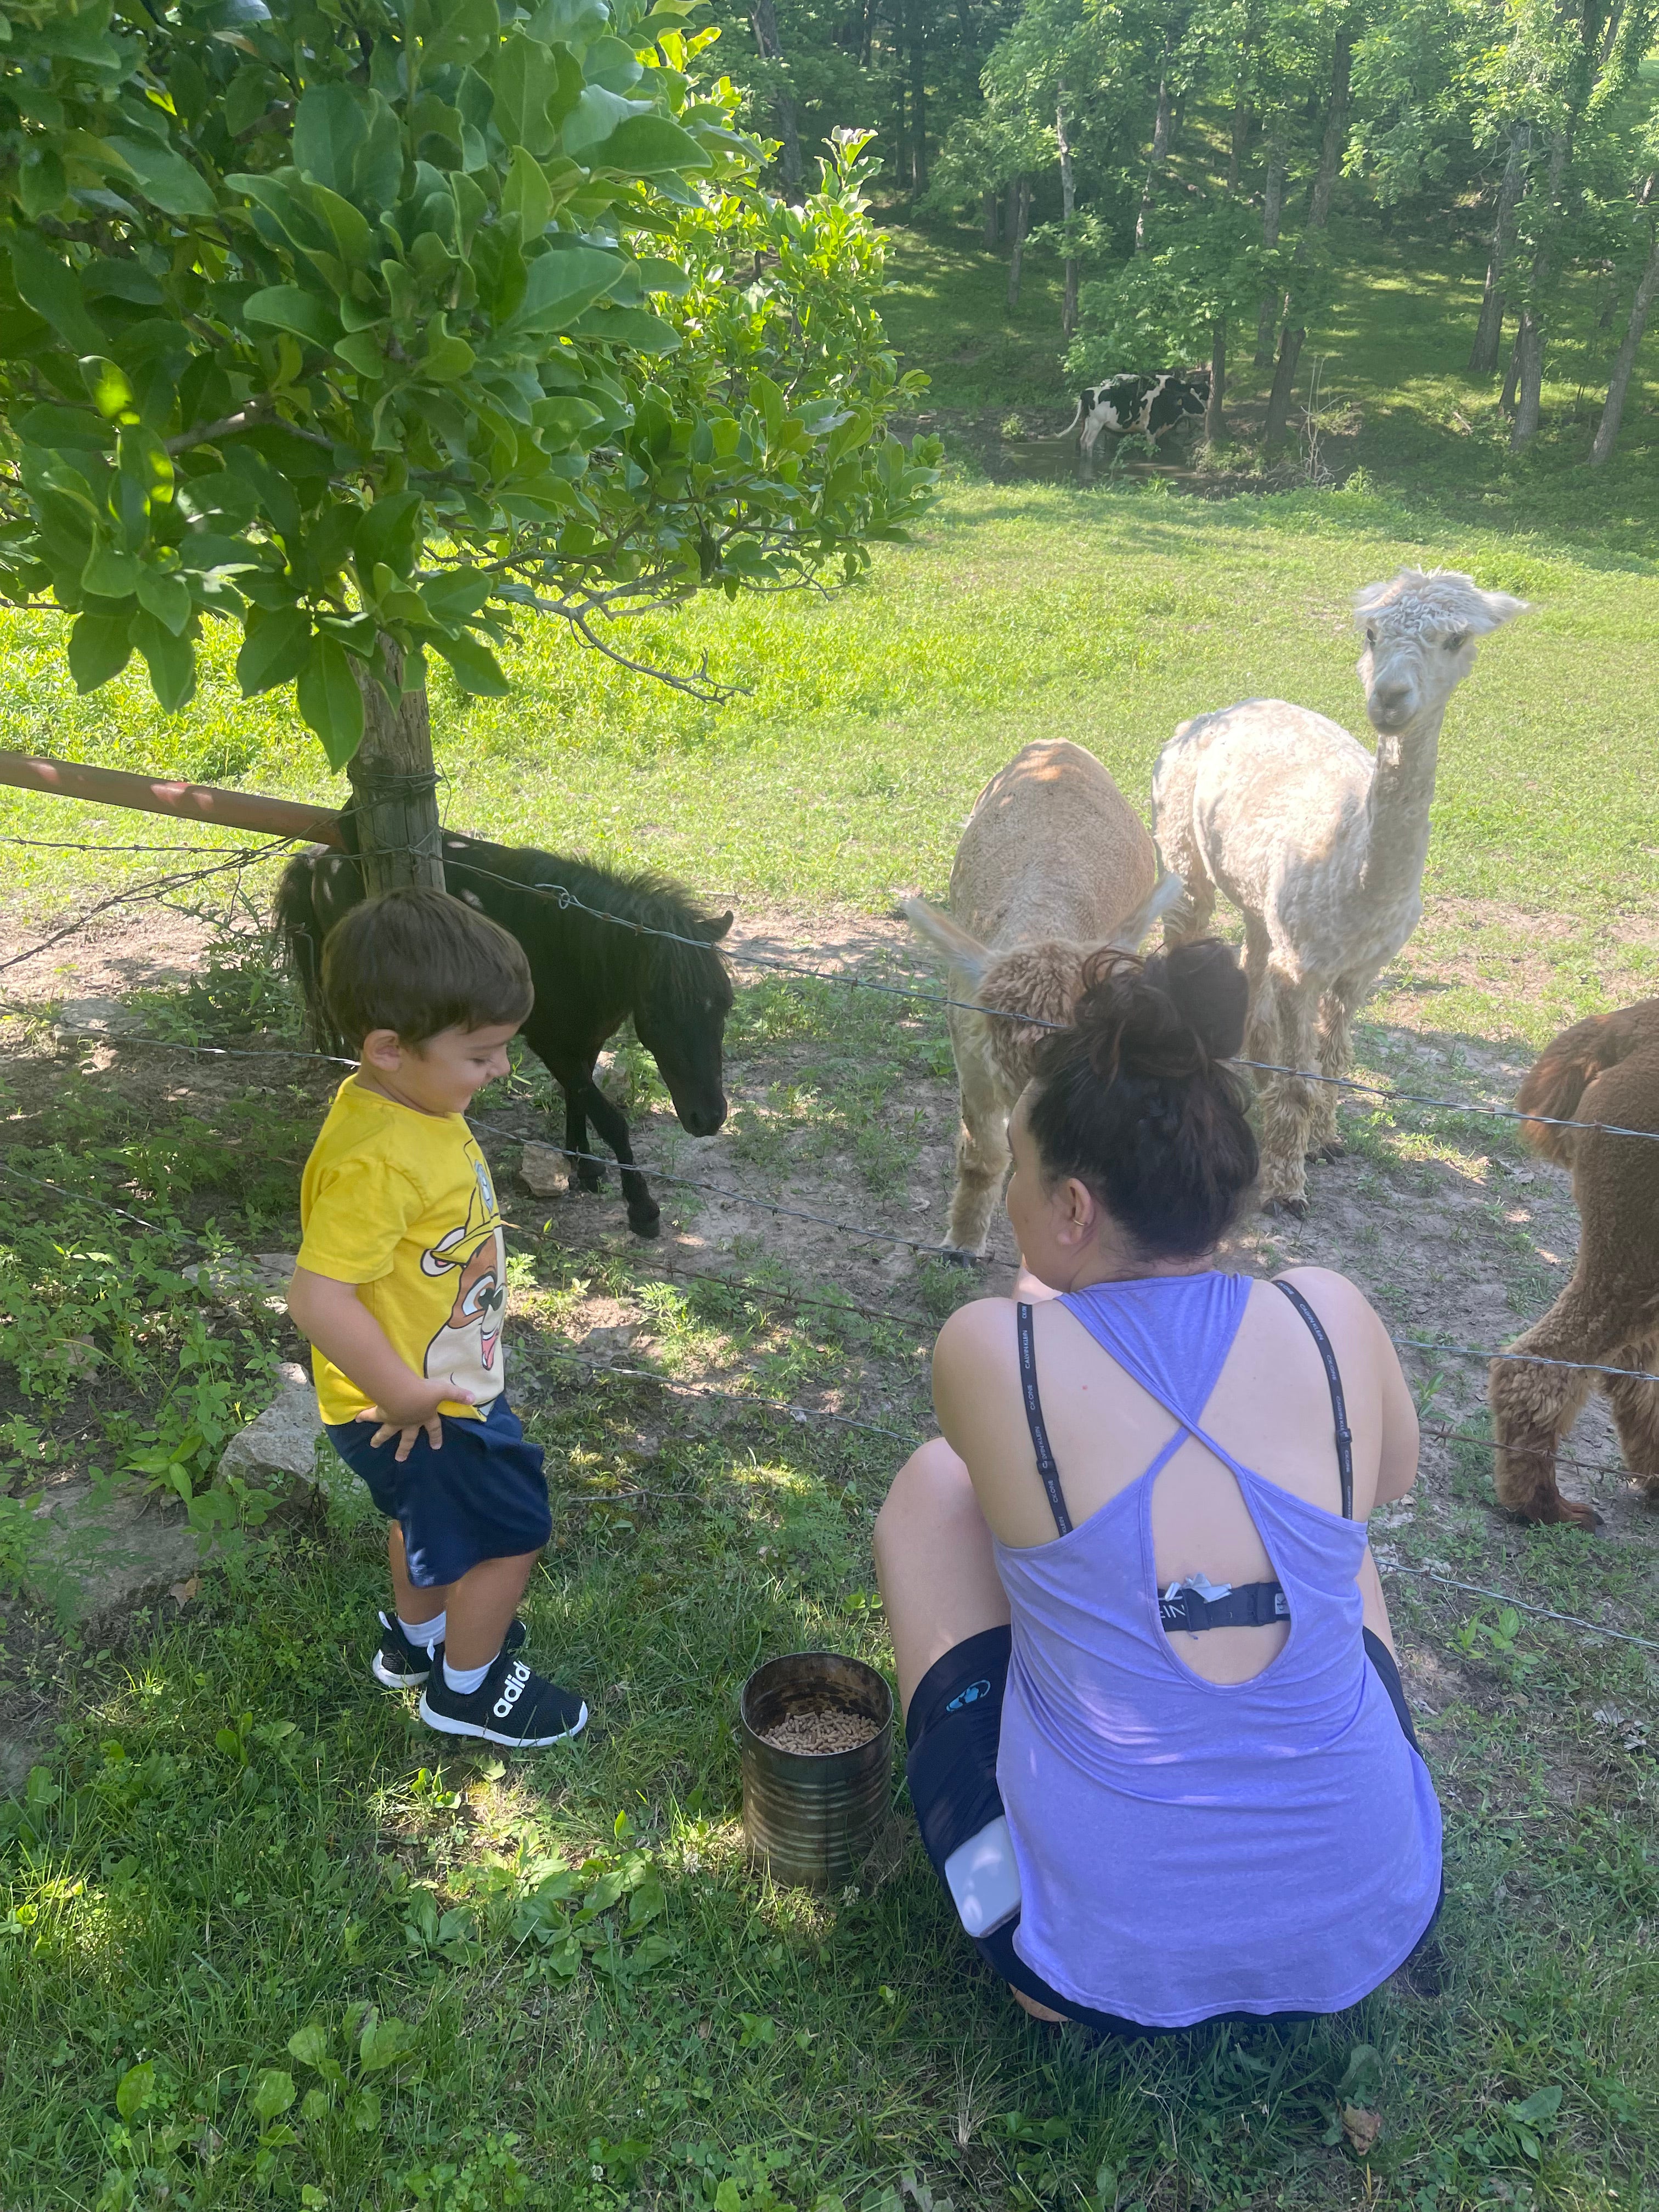 Embrace Serenity at GG's Alpaca Farm: Where Nature Sings in Harmony